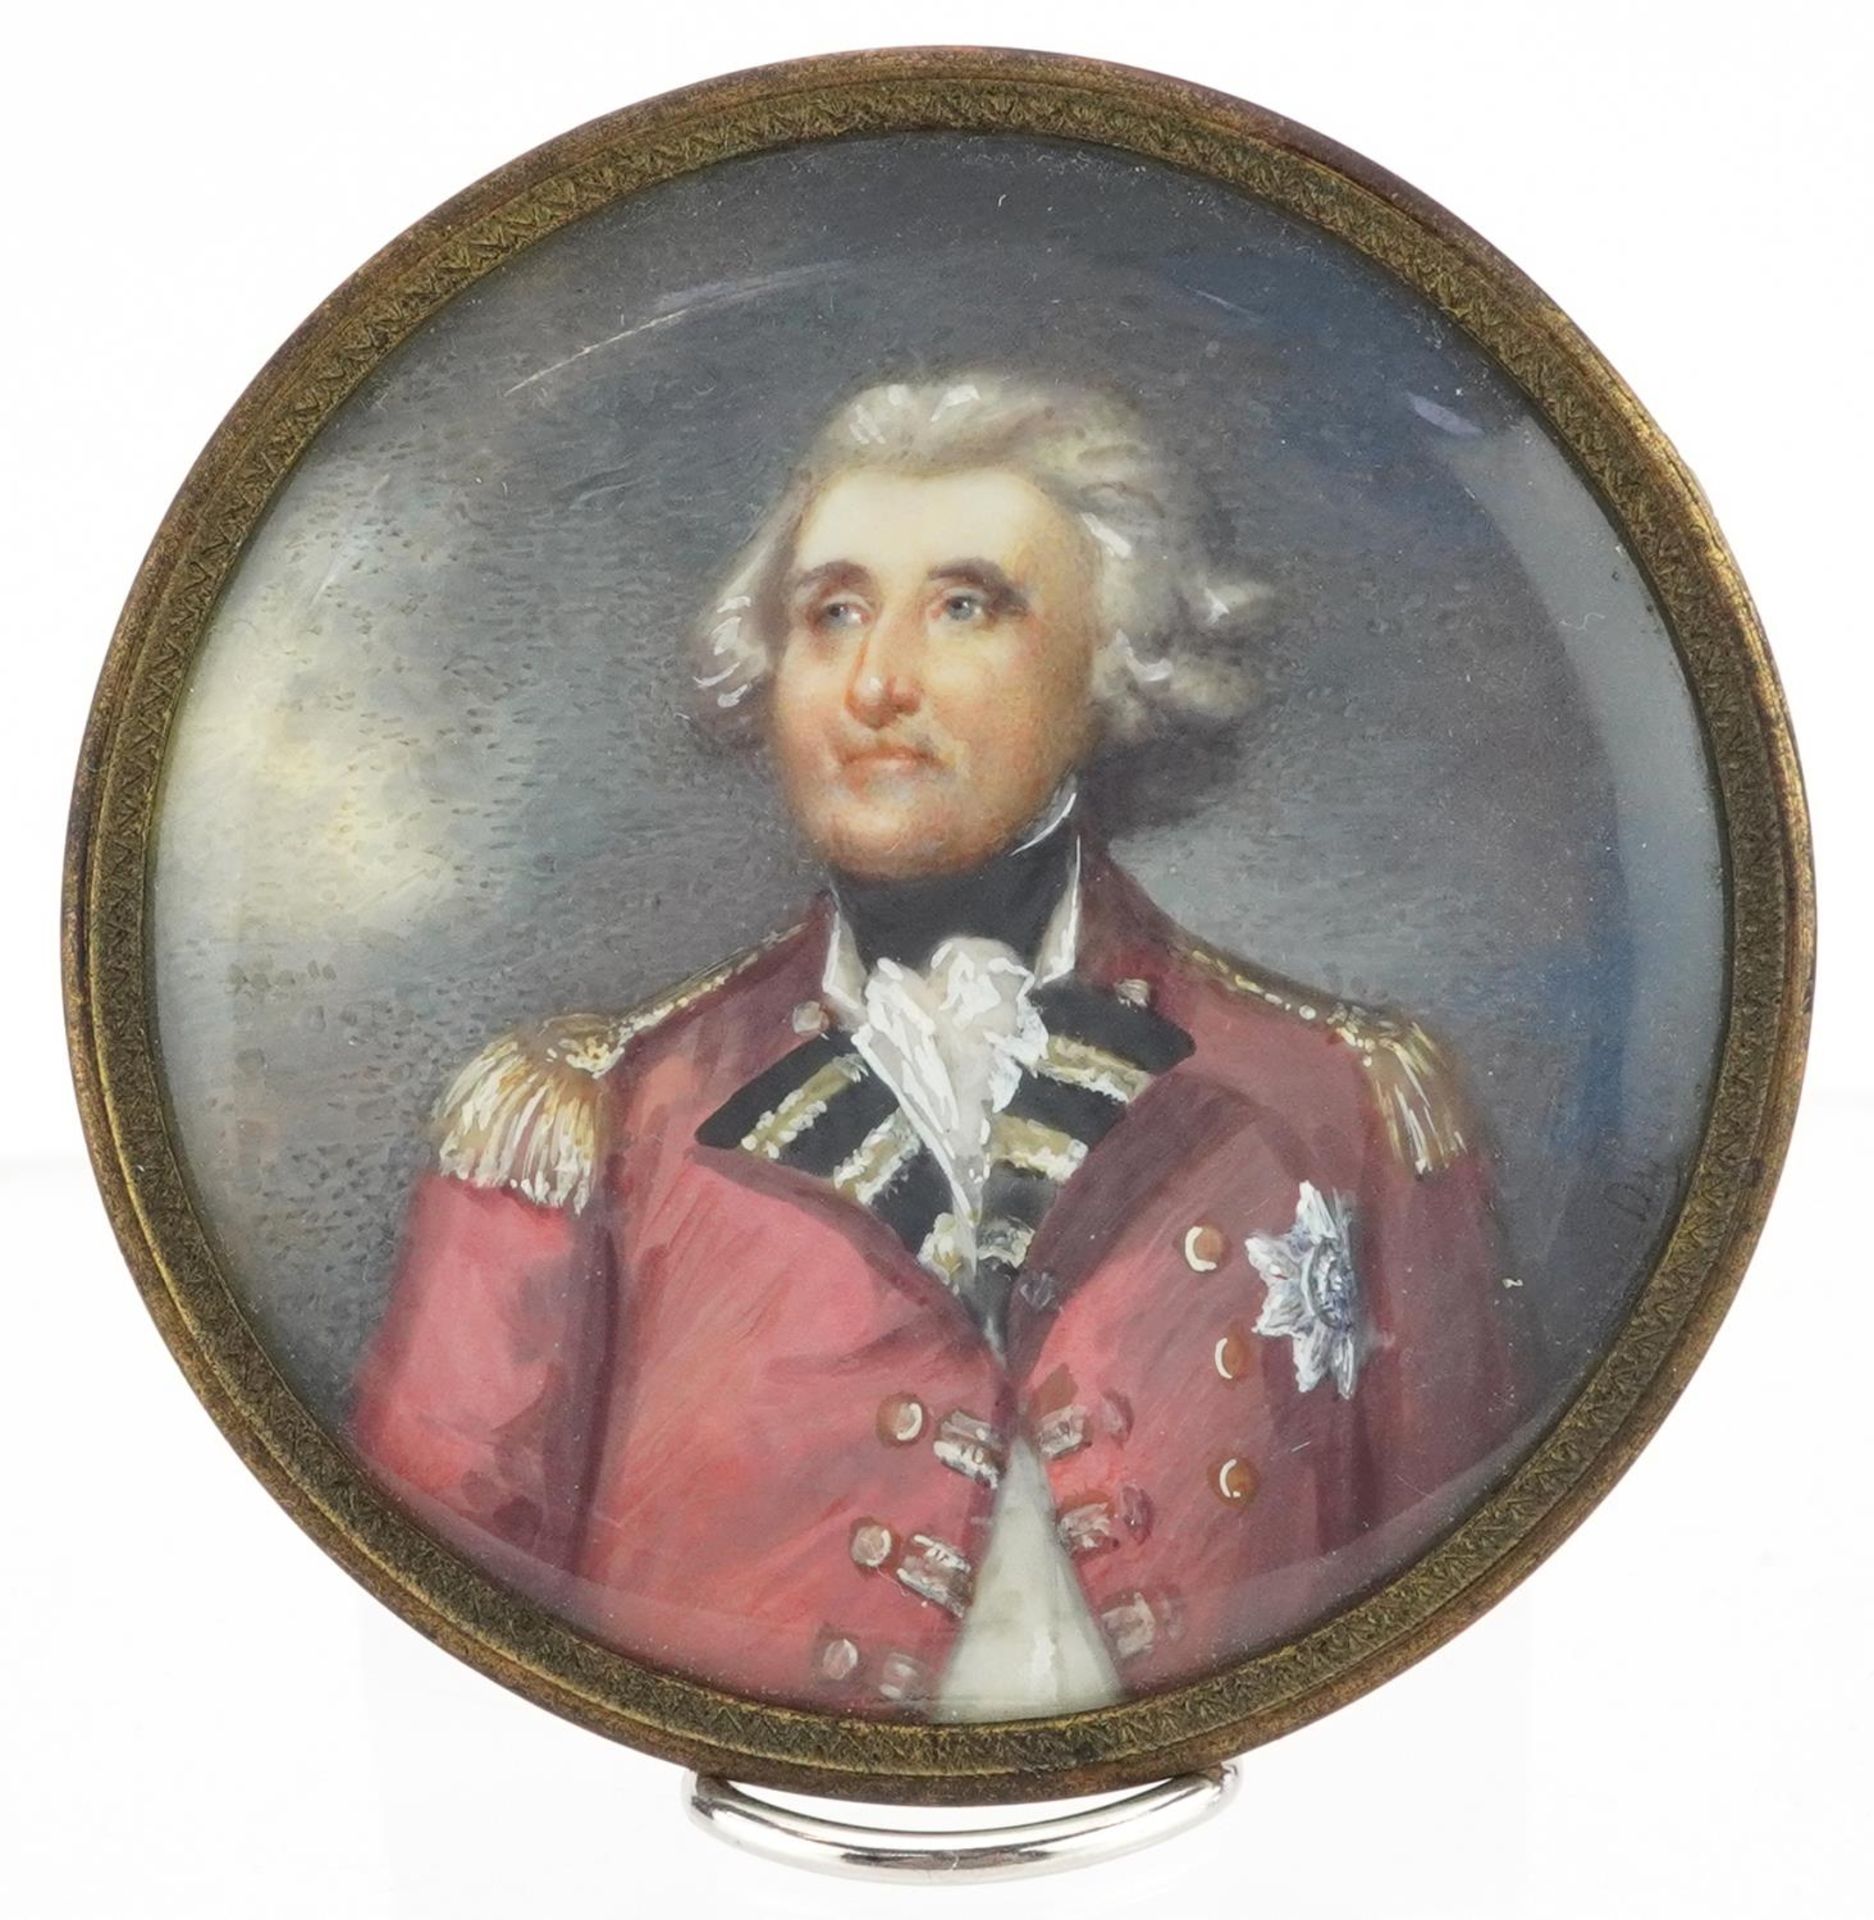 After Sir Joshua Reynolds - Lord Heathfield of Gibraltar, oval hand painted portrait miniature - Image 2 of 5